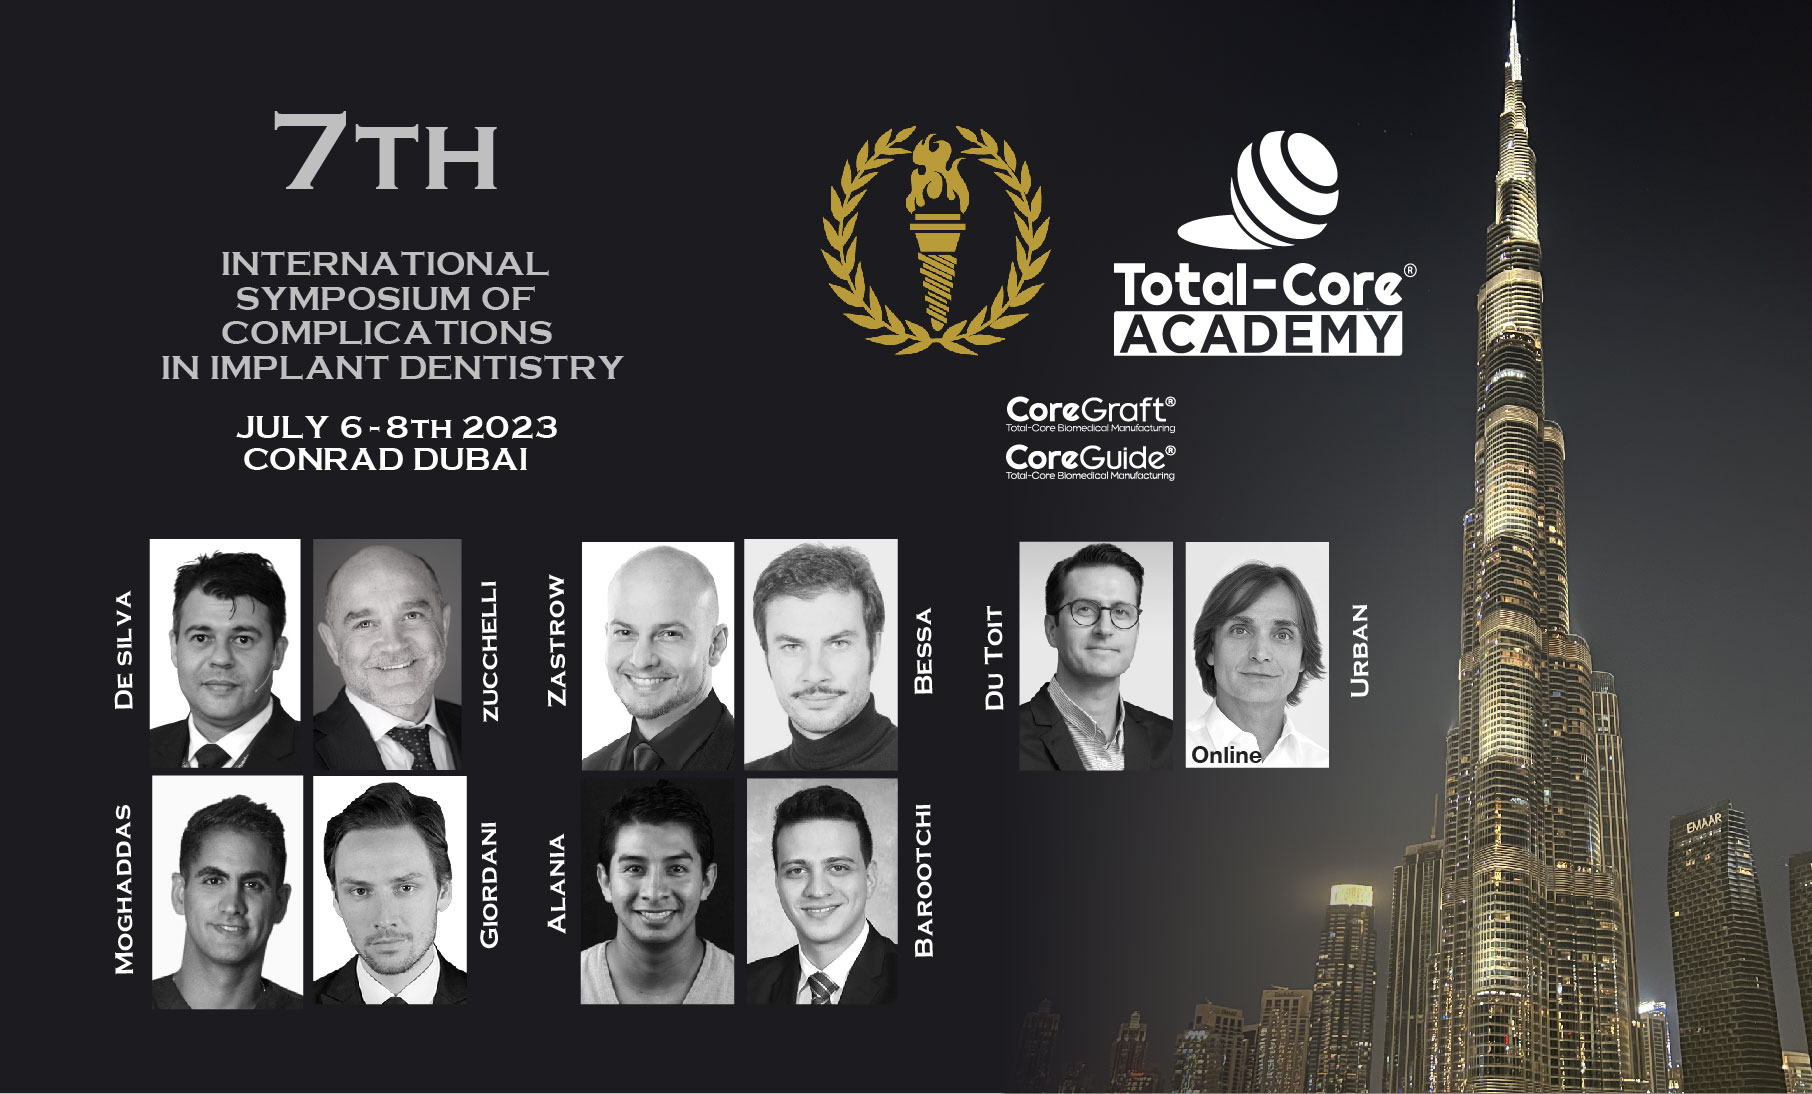 >7th INTERNATIONAL SYMPOSIUM OF COMPLICATIONS IN IMPLANT DENTISTRY